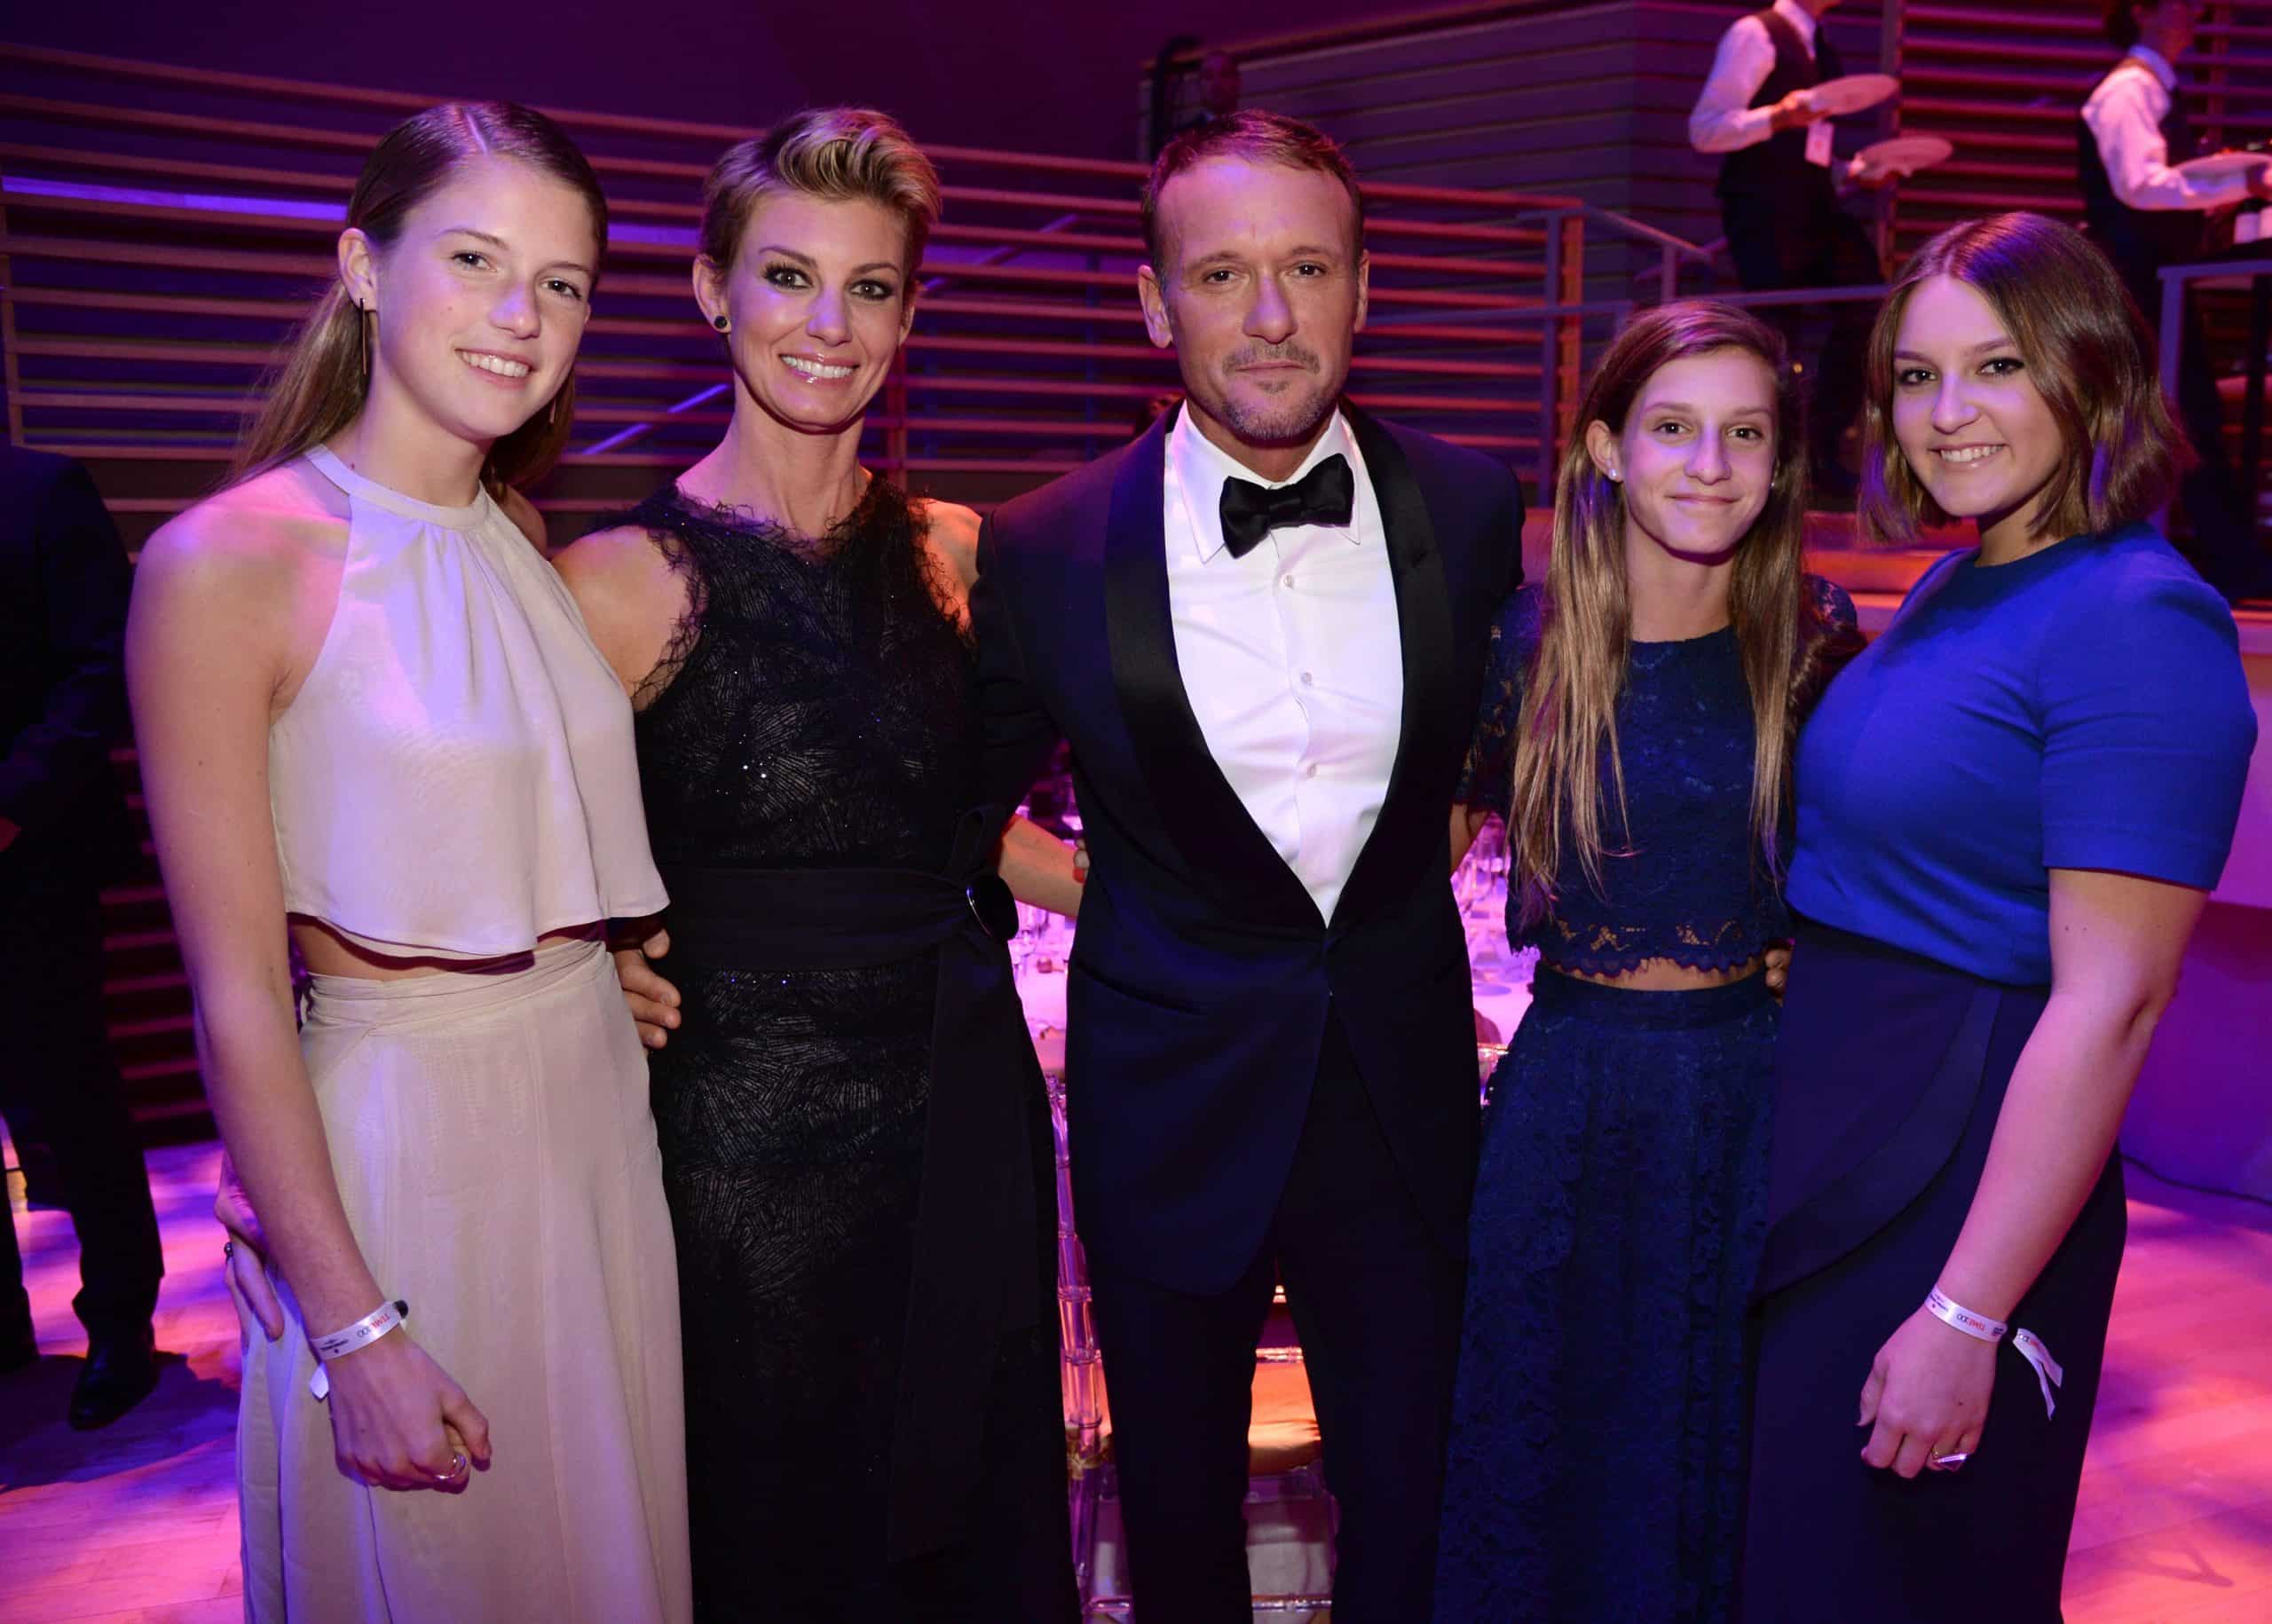 Tim McGraw & Faith Hill with their daughters: Gracie, Maggie, & Audrey